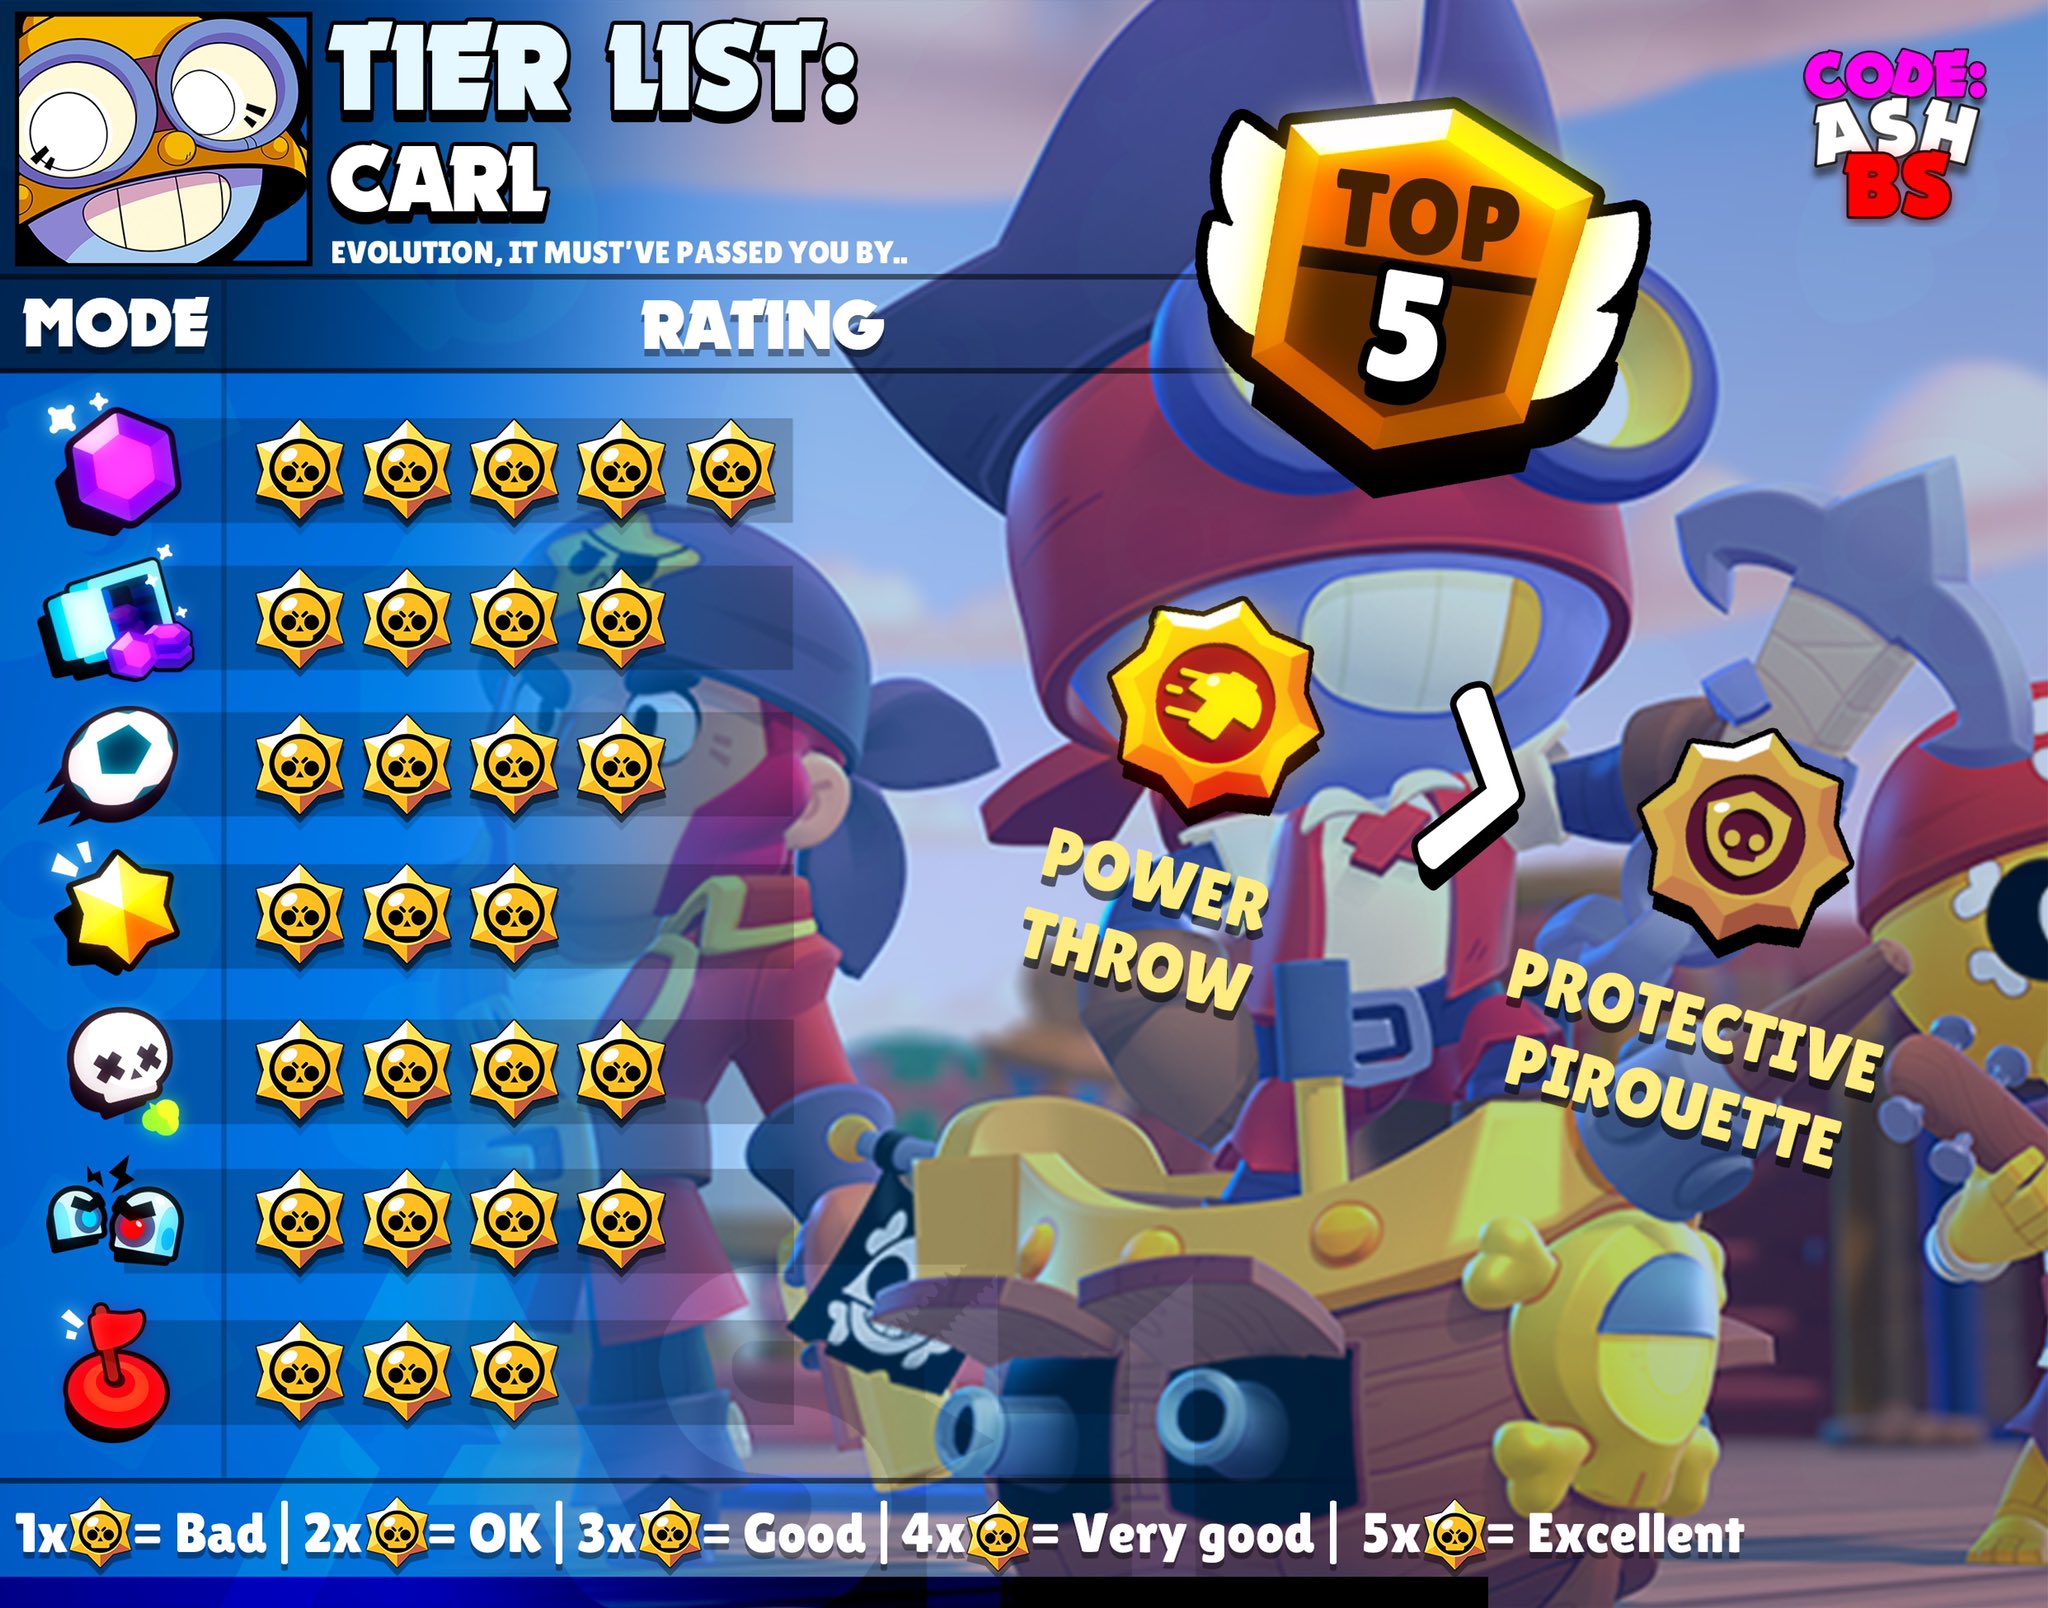 Code Ashbs On Twitter Carl Tier List For Every Game Mode Along With The Best Maps And Suggested Comps He S One Of The Best Brawlers In The Game Good Everywhere Carl Brawlstars - genio brawl stars ash